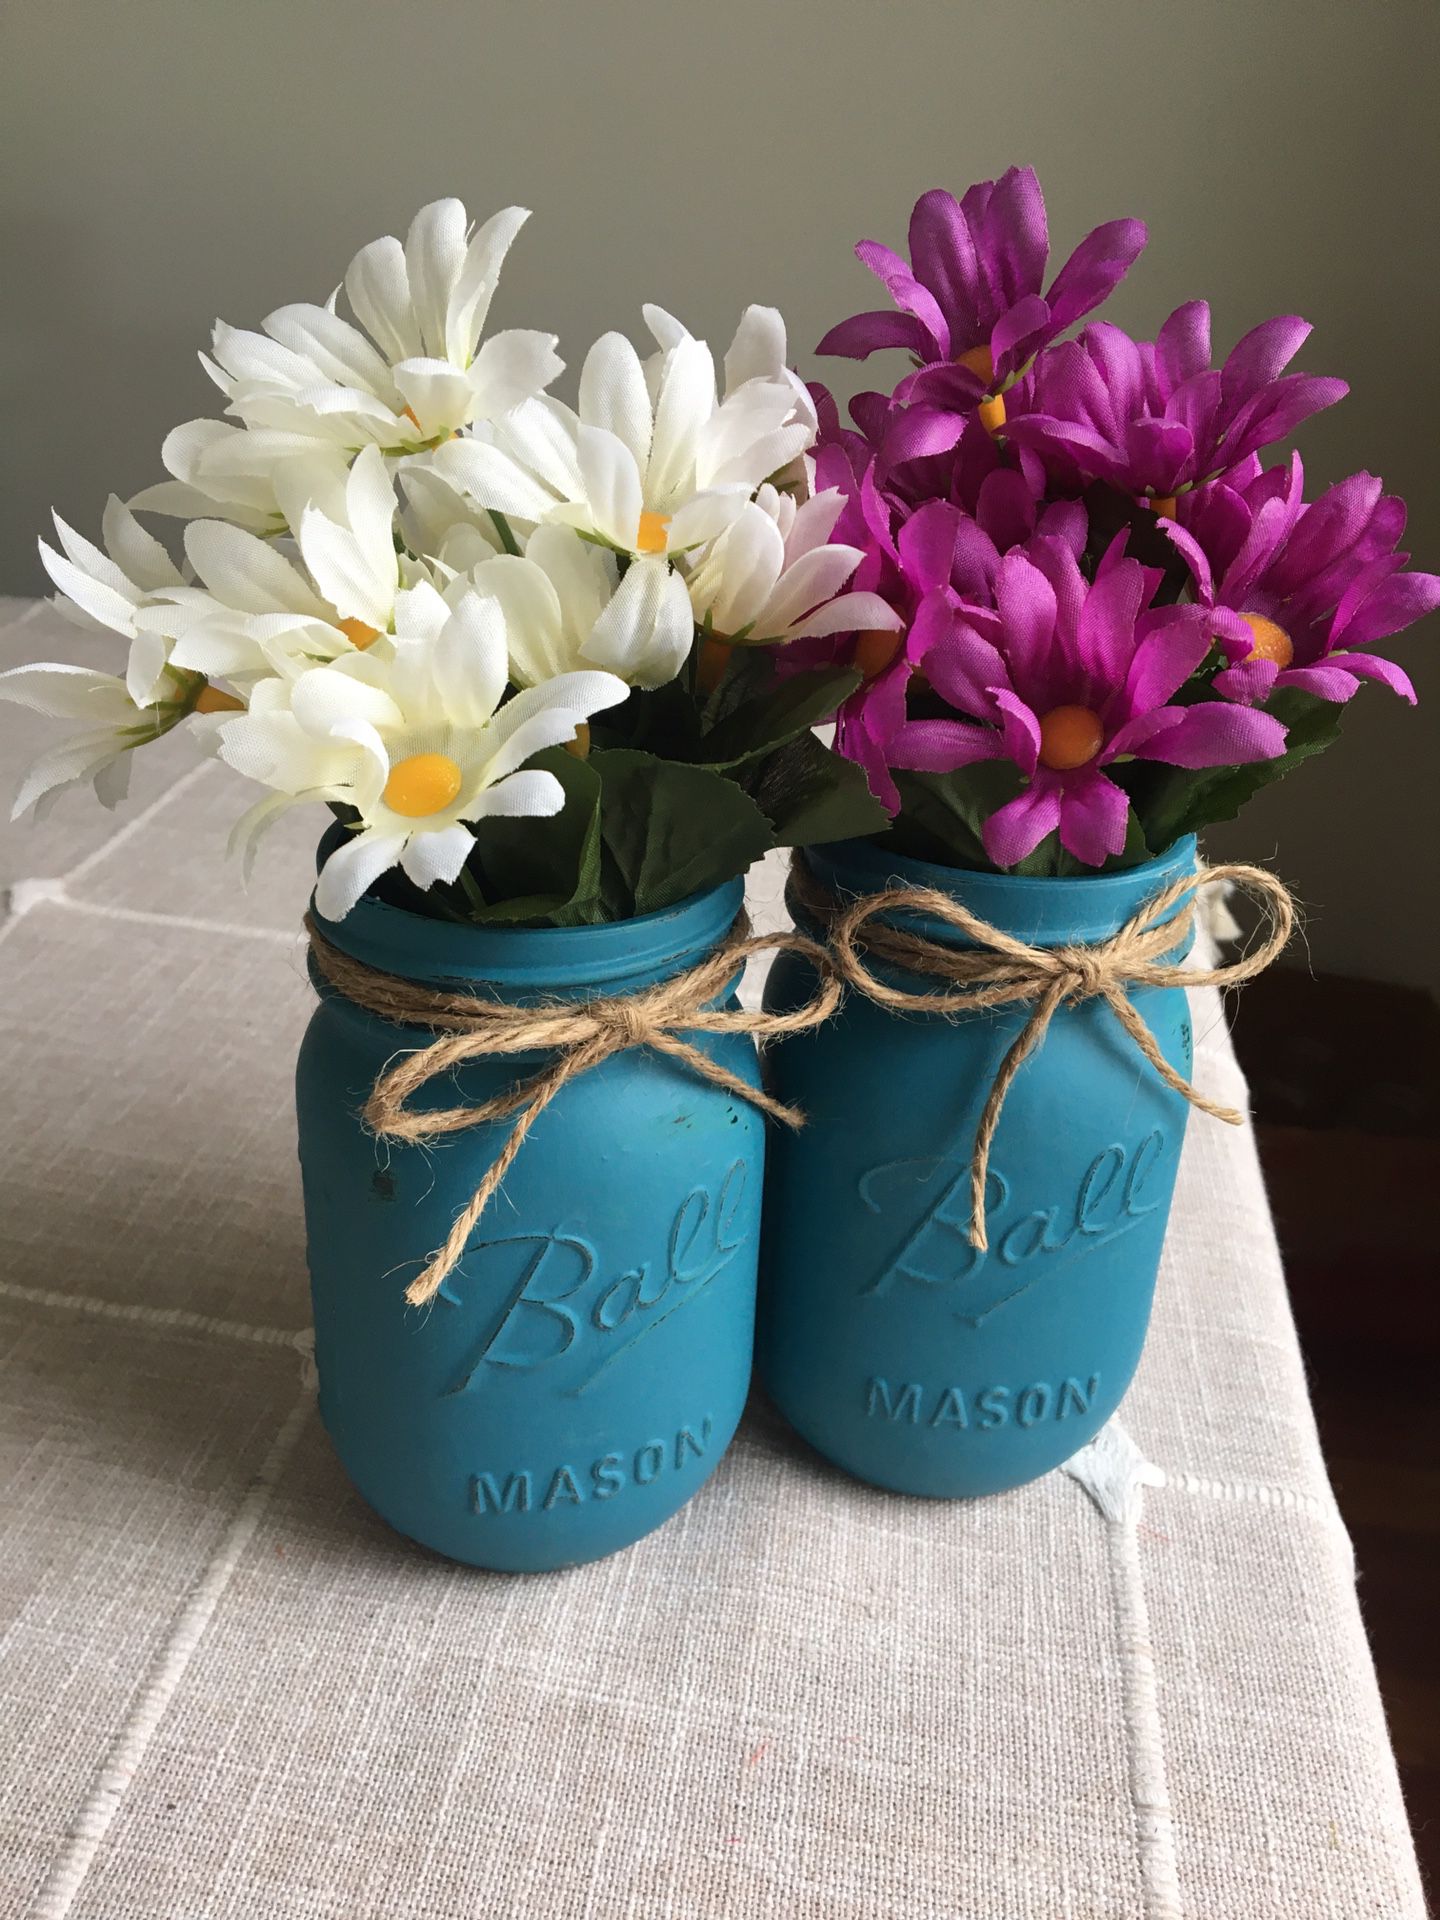 Distressed mason jar vases with silk flowers included! You choose the jar/flower colors $12 for both